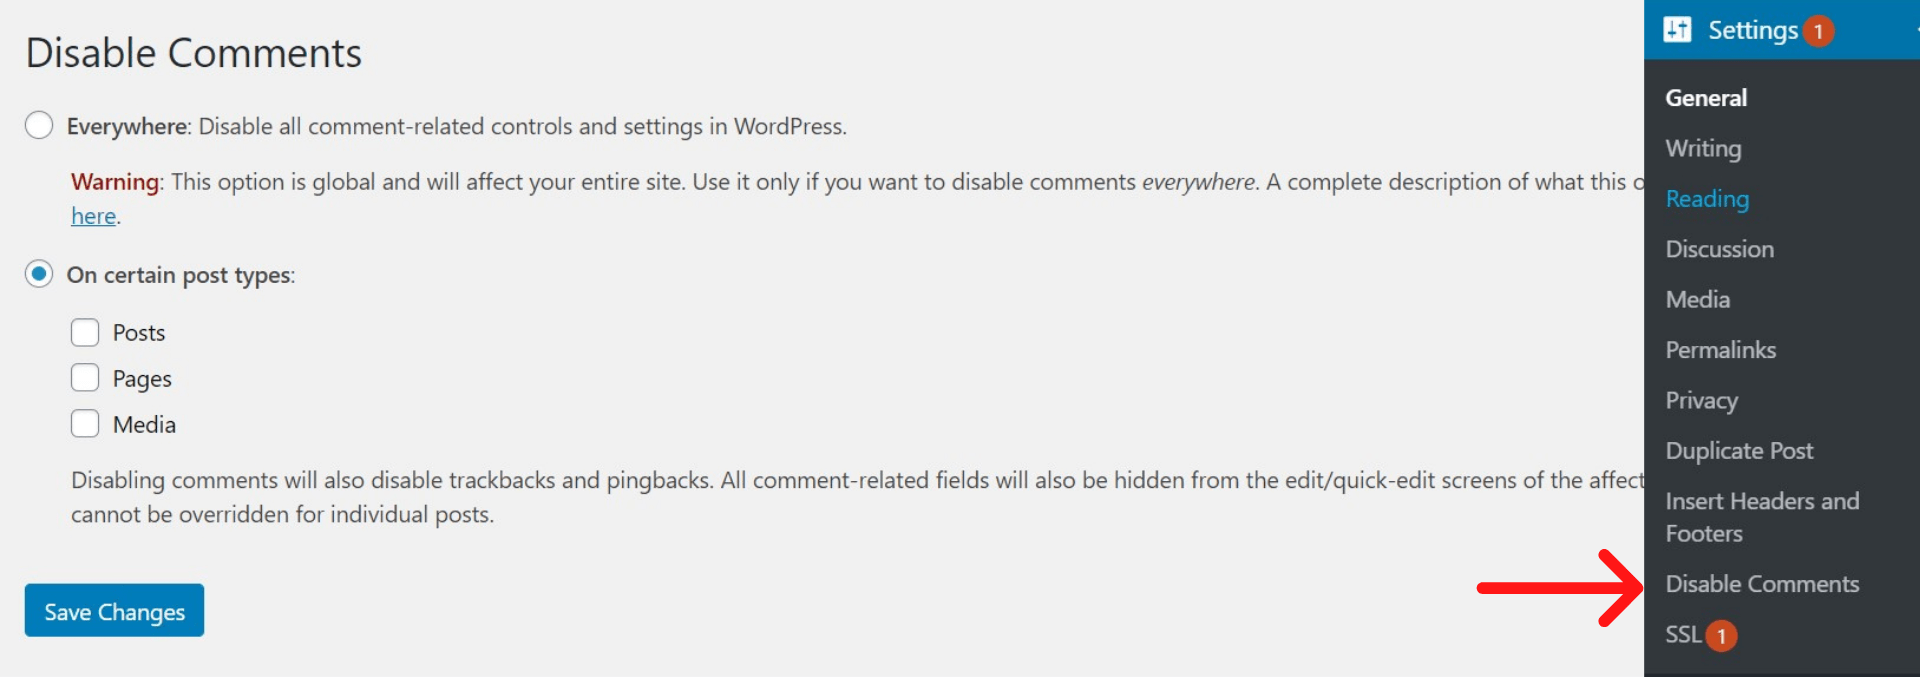 How to Disable Comments in WordPress Disable comments using Plugin